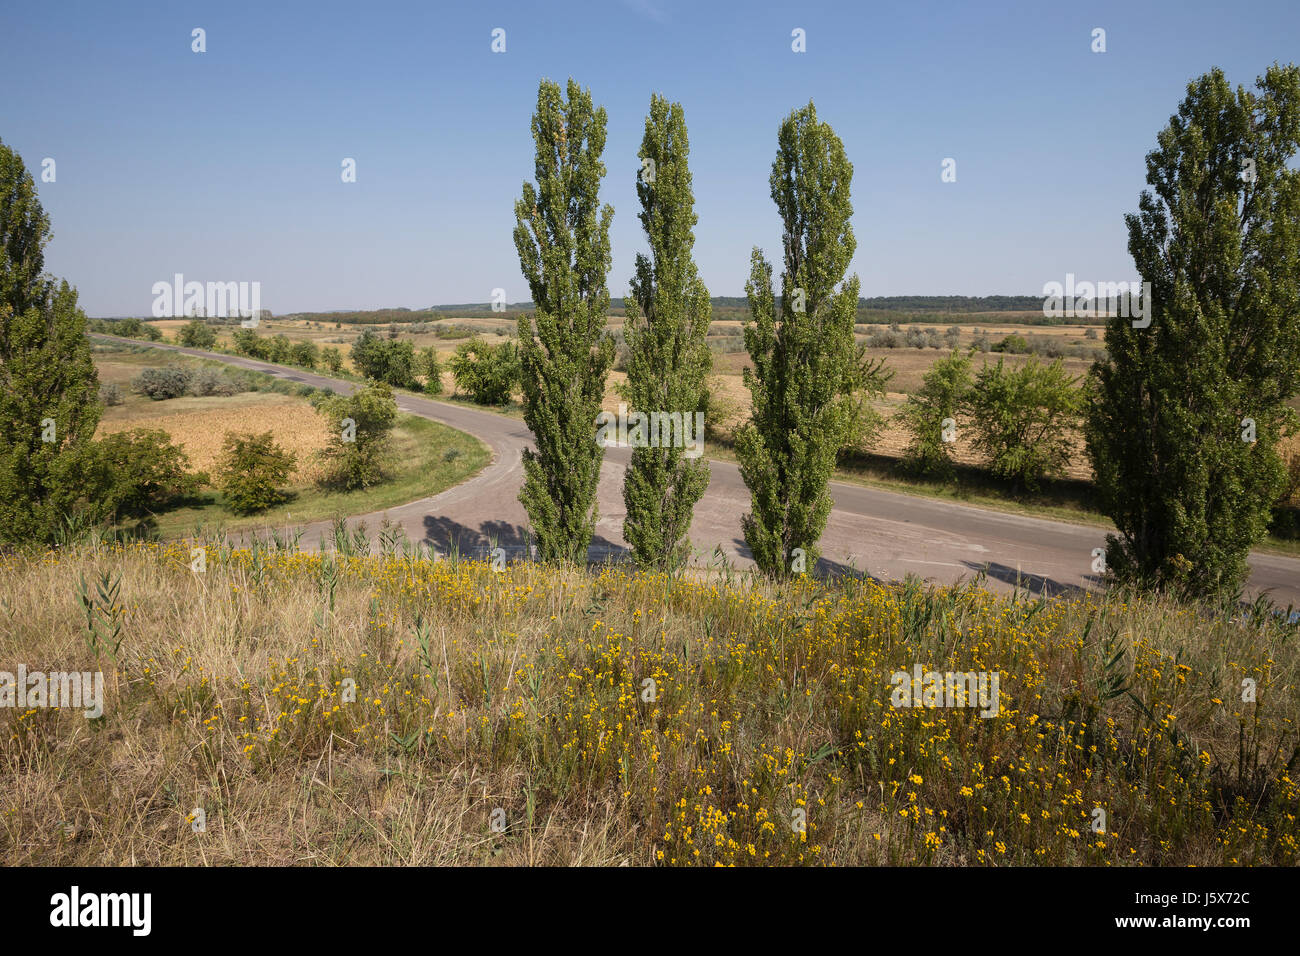 Three poplars and a road. There are three polars and the road junction. Stock Photo